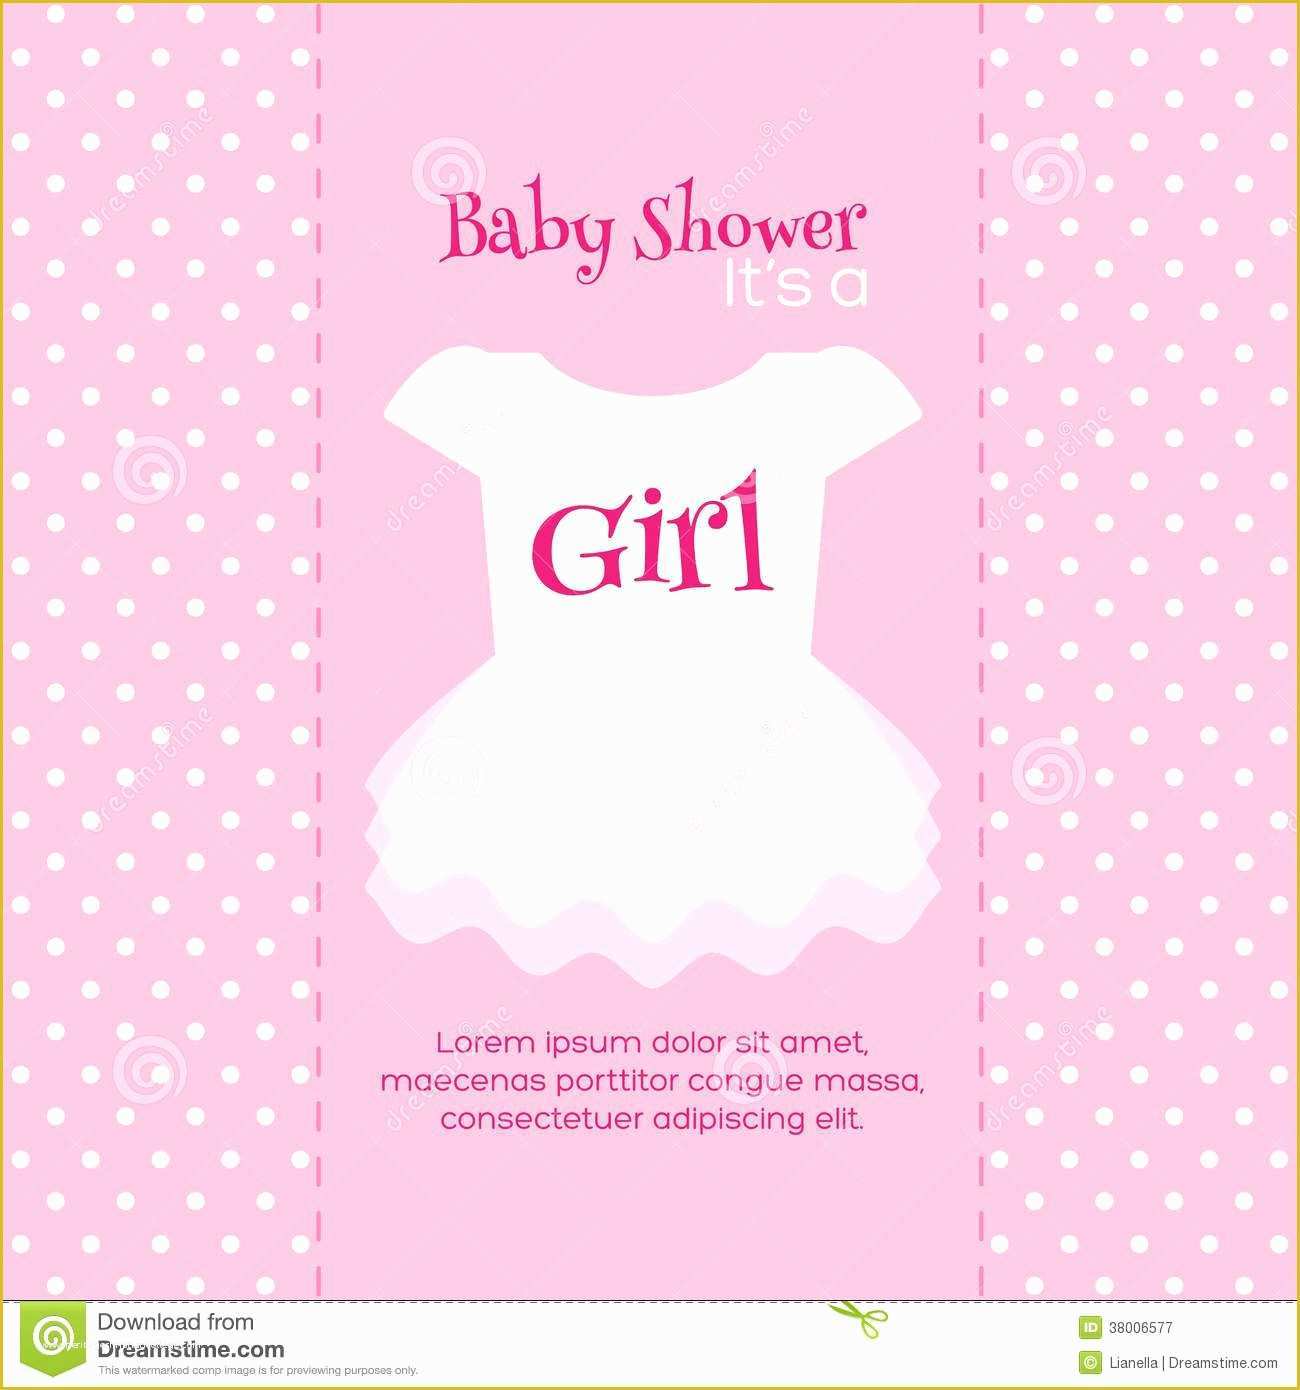 Free Diaper Shower Invitations Templates Of Baby Shower Invitations Cards Designs Free Baby Shower